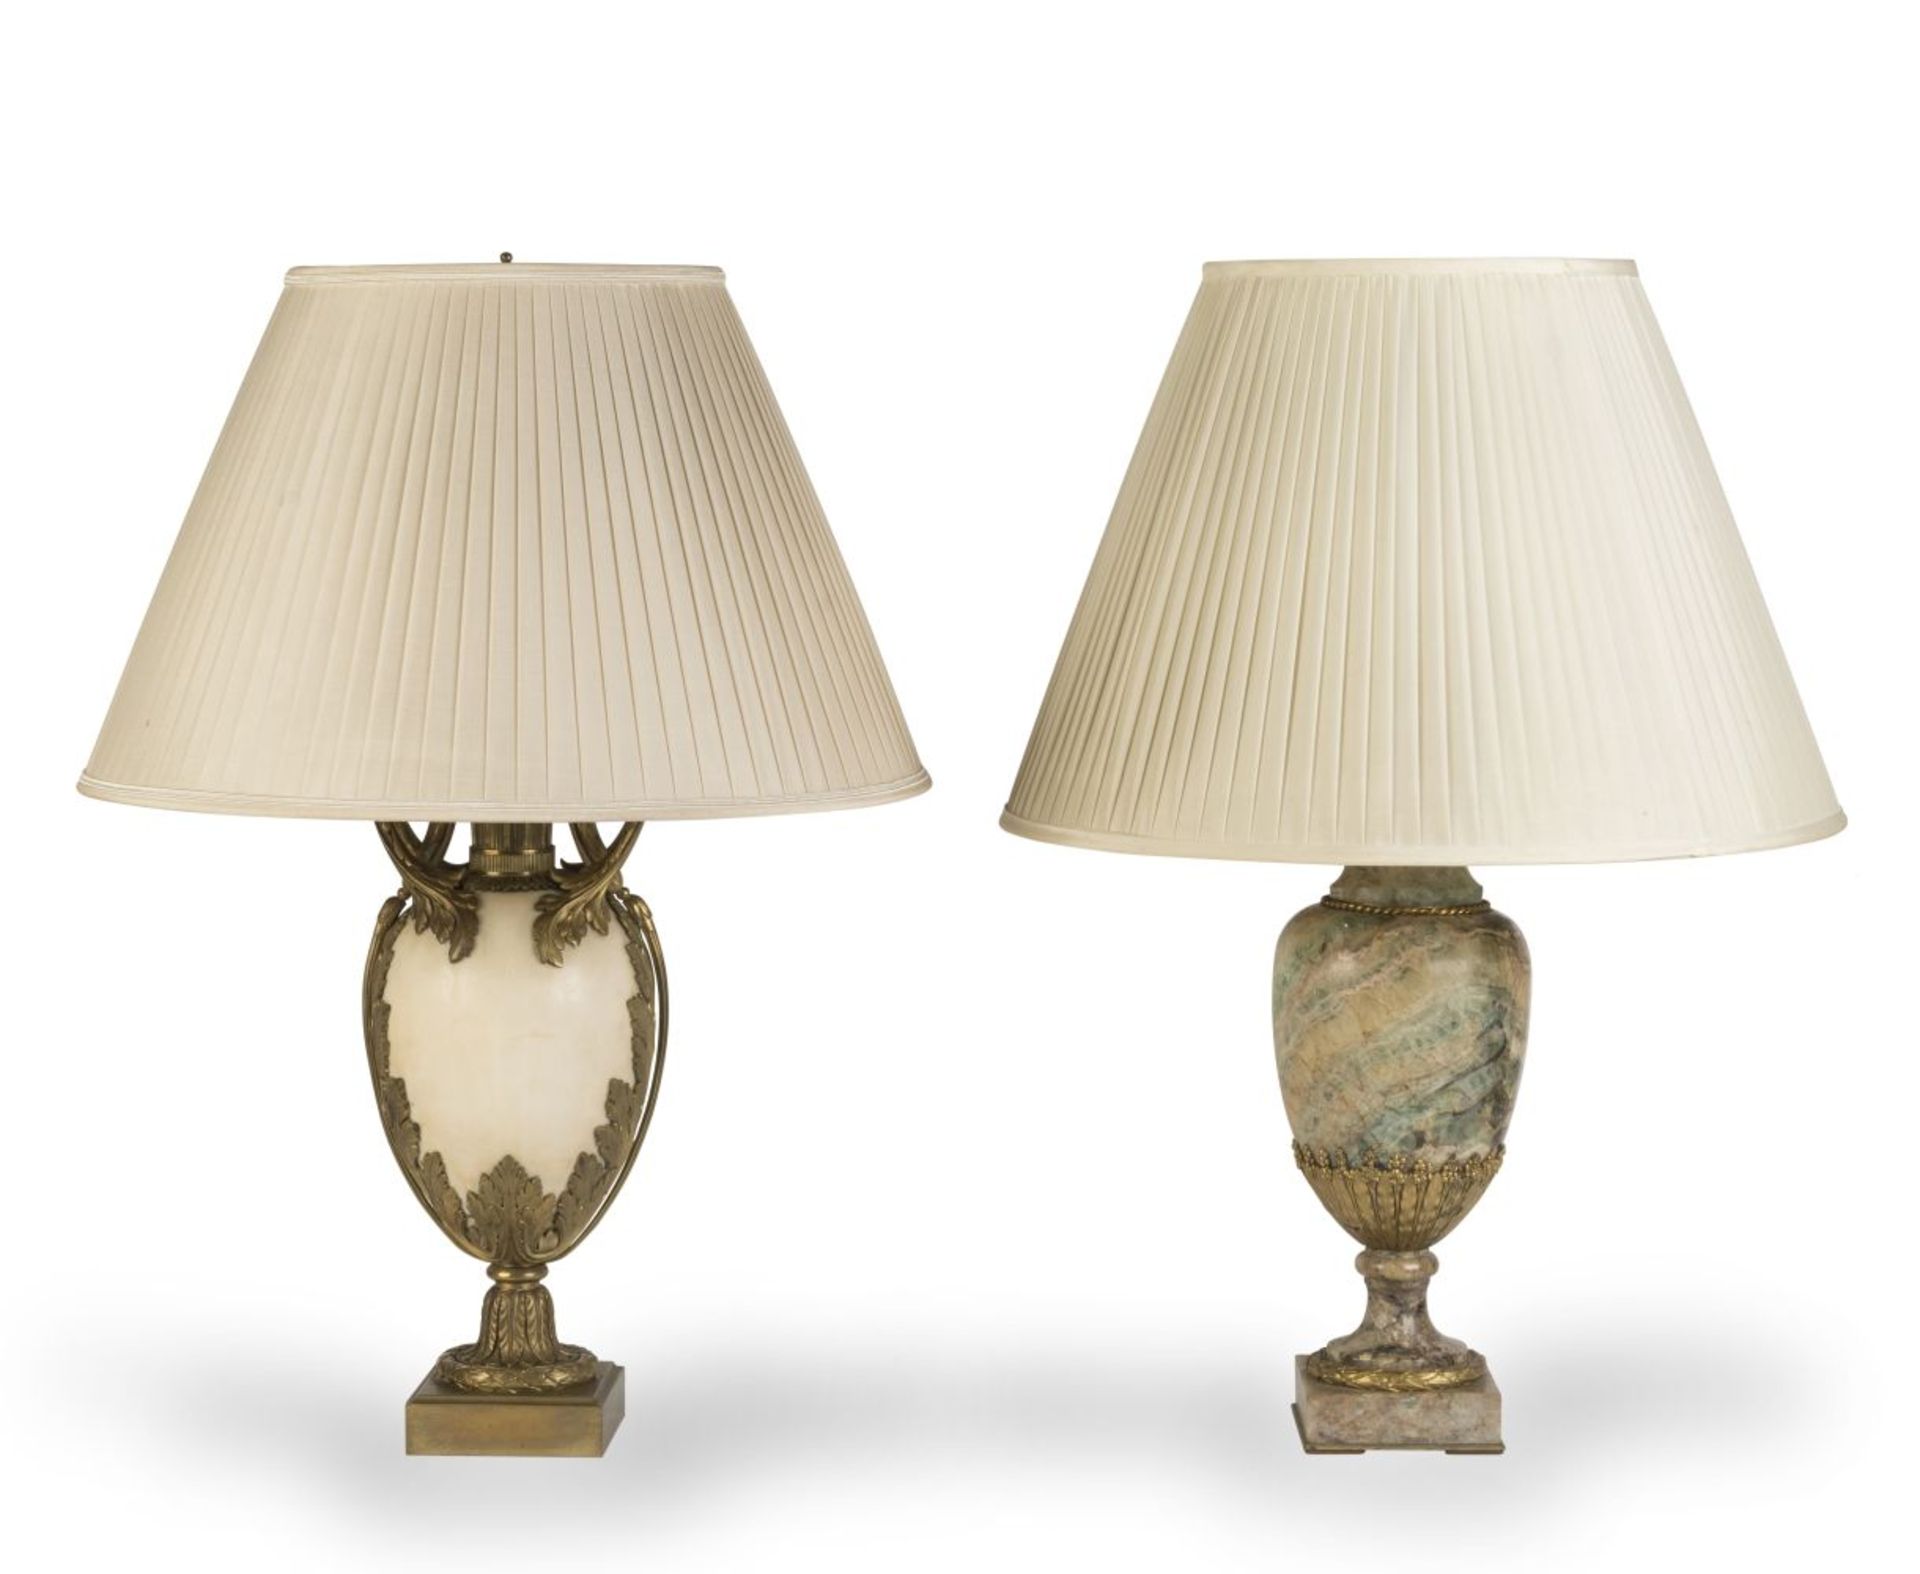 TWO LOUIS XVI STYLE ORMOLU-MOUNTED TABLE LAMPS Late 19th century